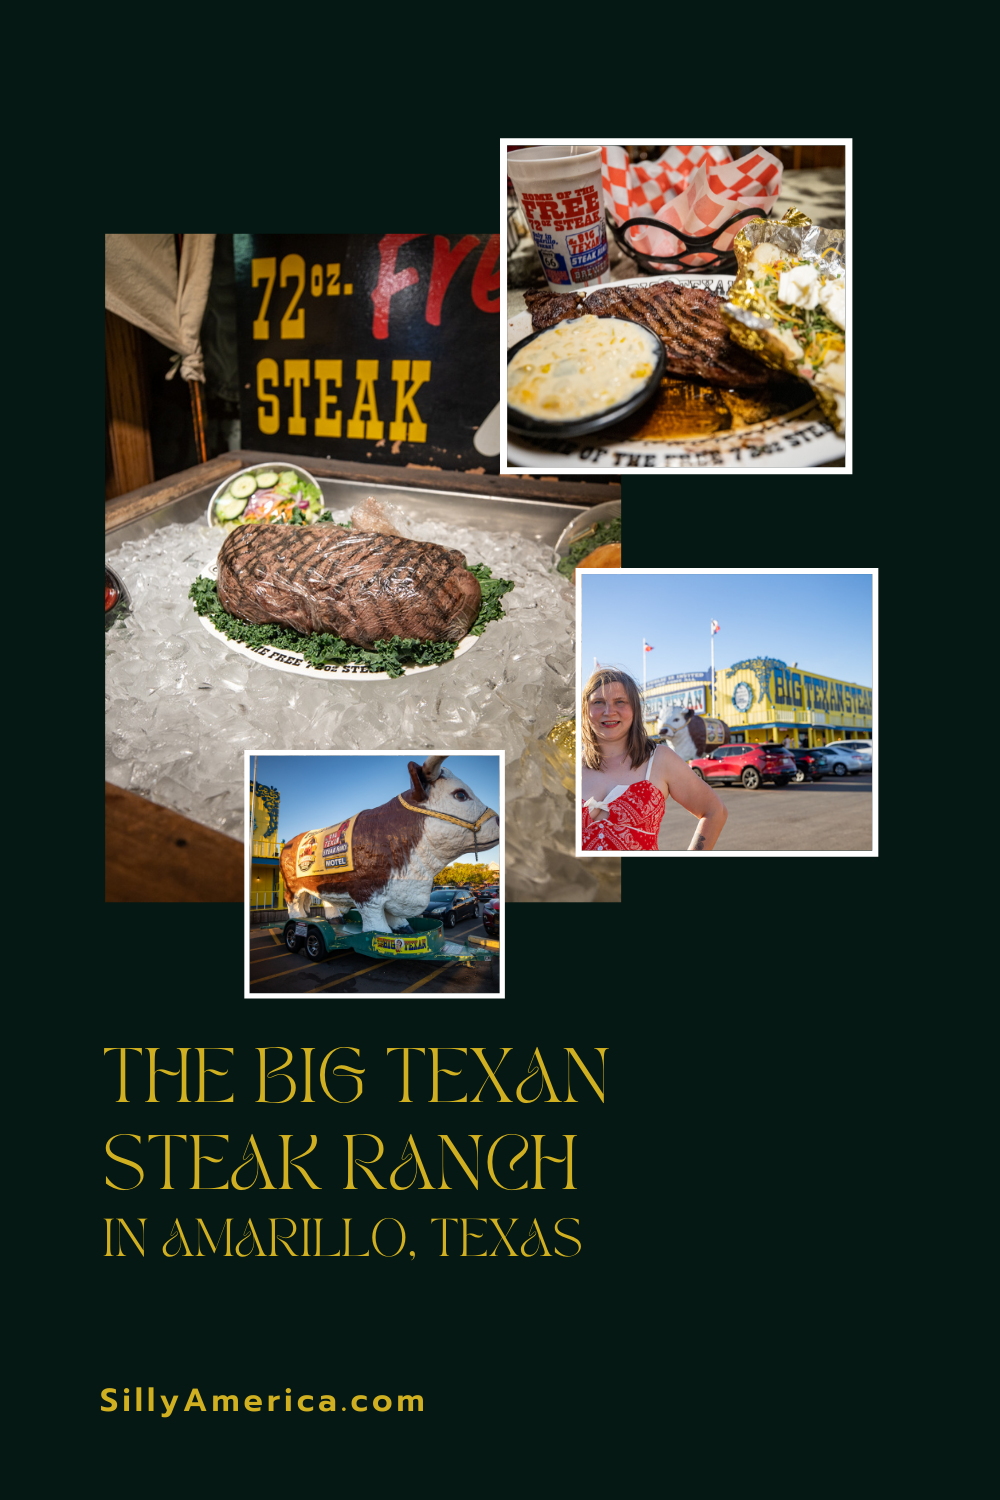 Could you eat a 72oz steak in one hour? I’m not sure I could eat a 72 ounce steak in 72 hours. But that’s just me. Because over 10,000 people have come, eaten, and conquered this meal that’s as big as Texas here at The Big Texan Steak Ranch in Amarillo, Texas: the 72 oz. Steak Challenge.  #RoadTrips #RoadTripStop #Route66 #Route66RoadTrip #TexasRoute66 #Texas #TexasRoadTrip #TexasRoadsideAttractions #RoadsideAttractions #RoadsideAttraction #RoadsideAmerica #RoadTrip #EatingChallenge